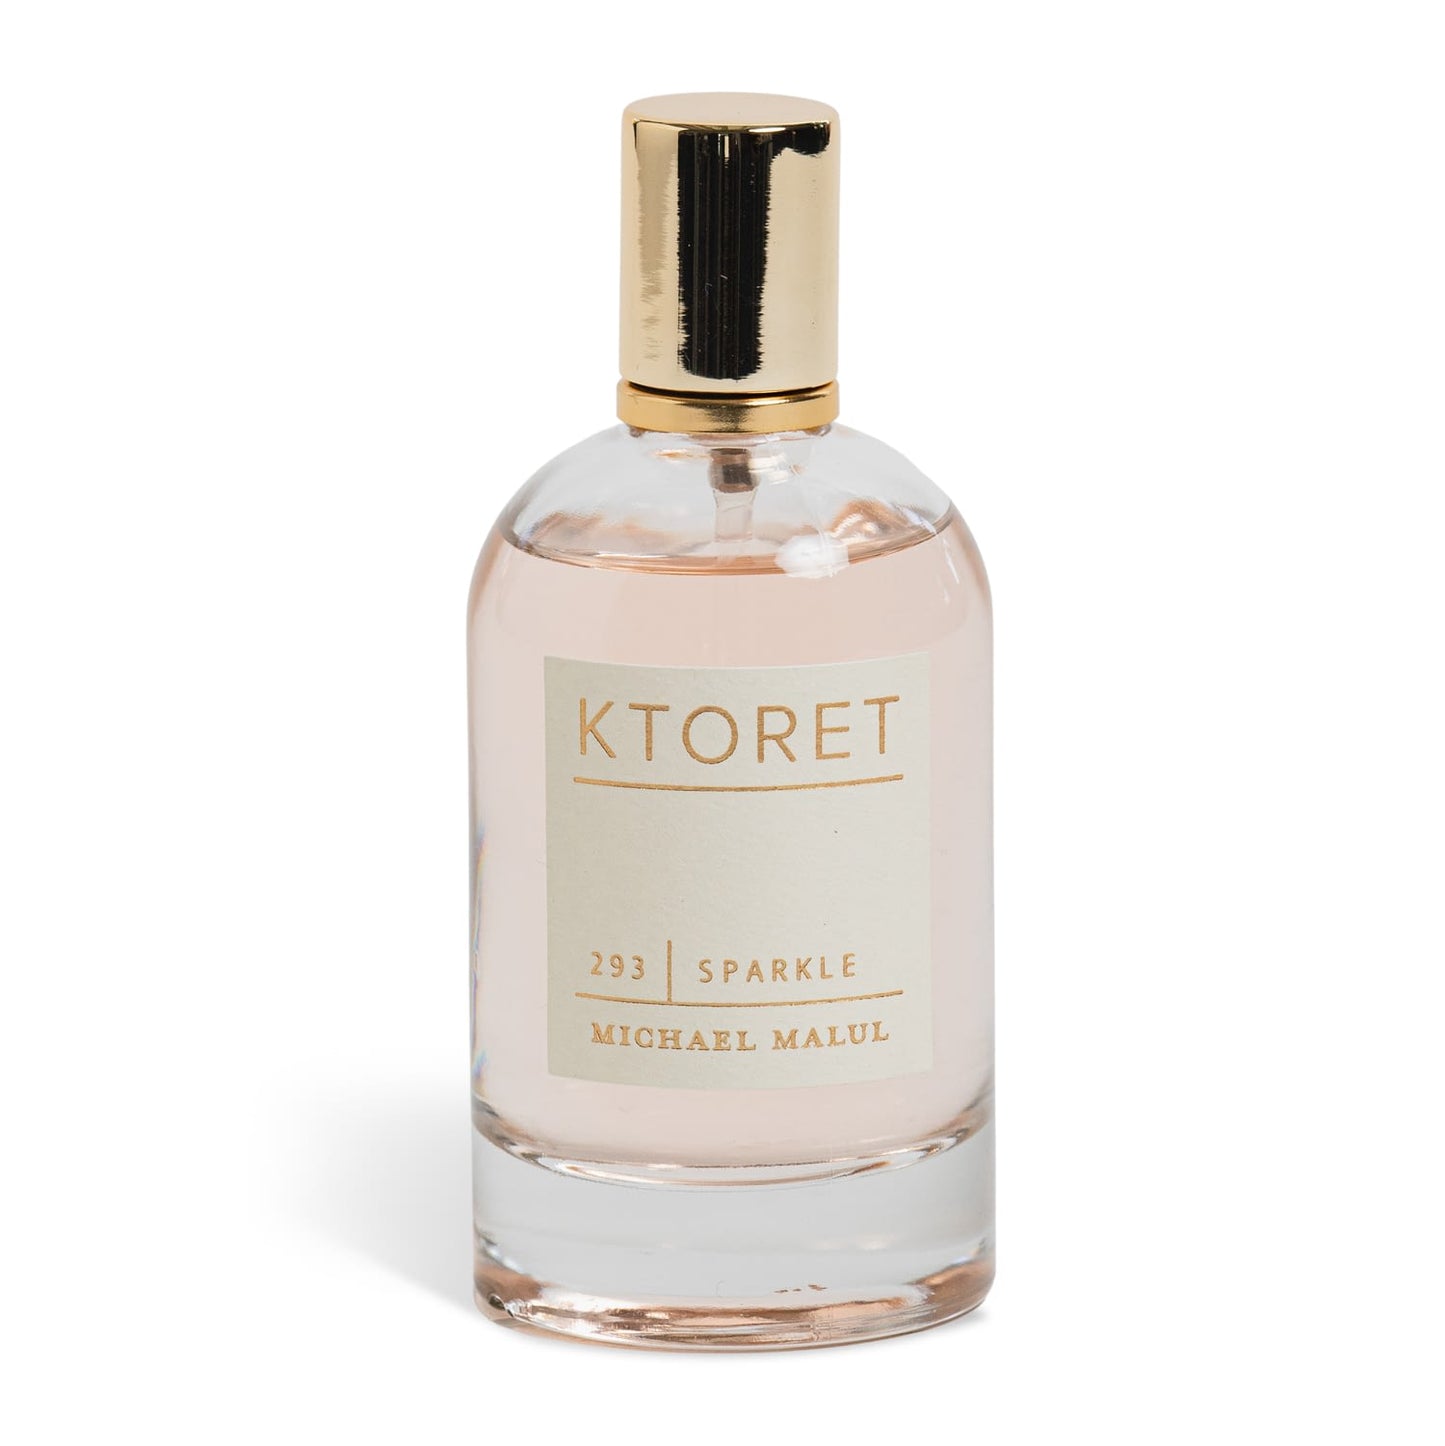 KTORET 293 Sparkle By Michael Malul - Scent In The City - Perfume & Cologne